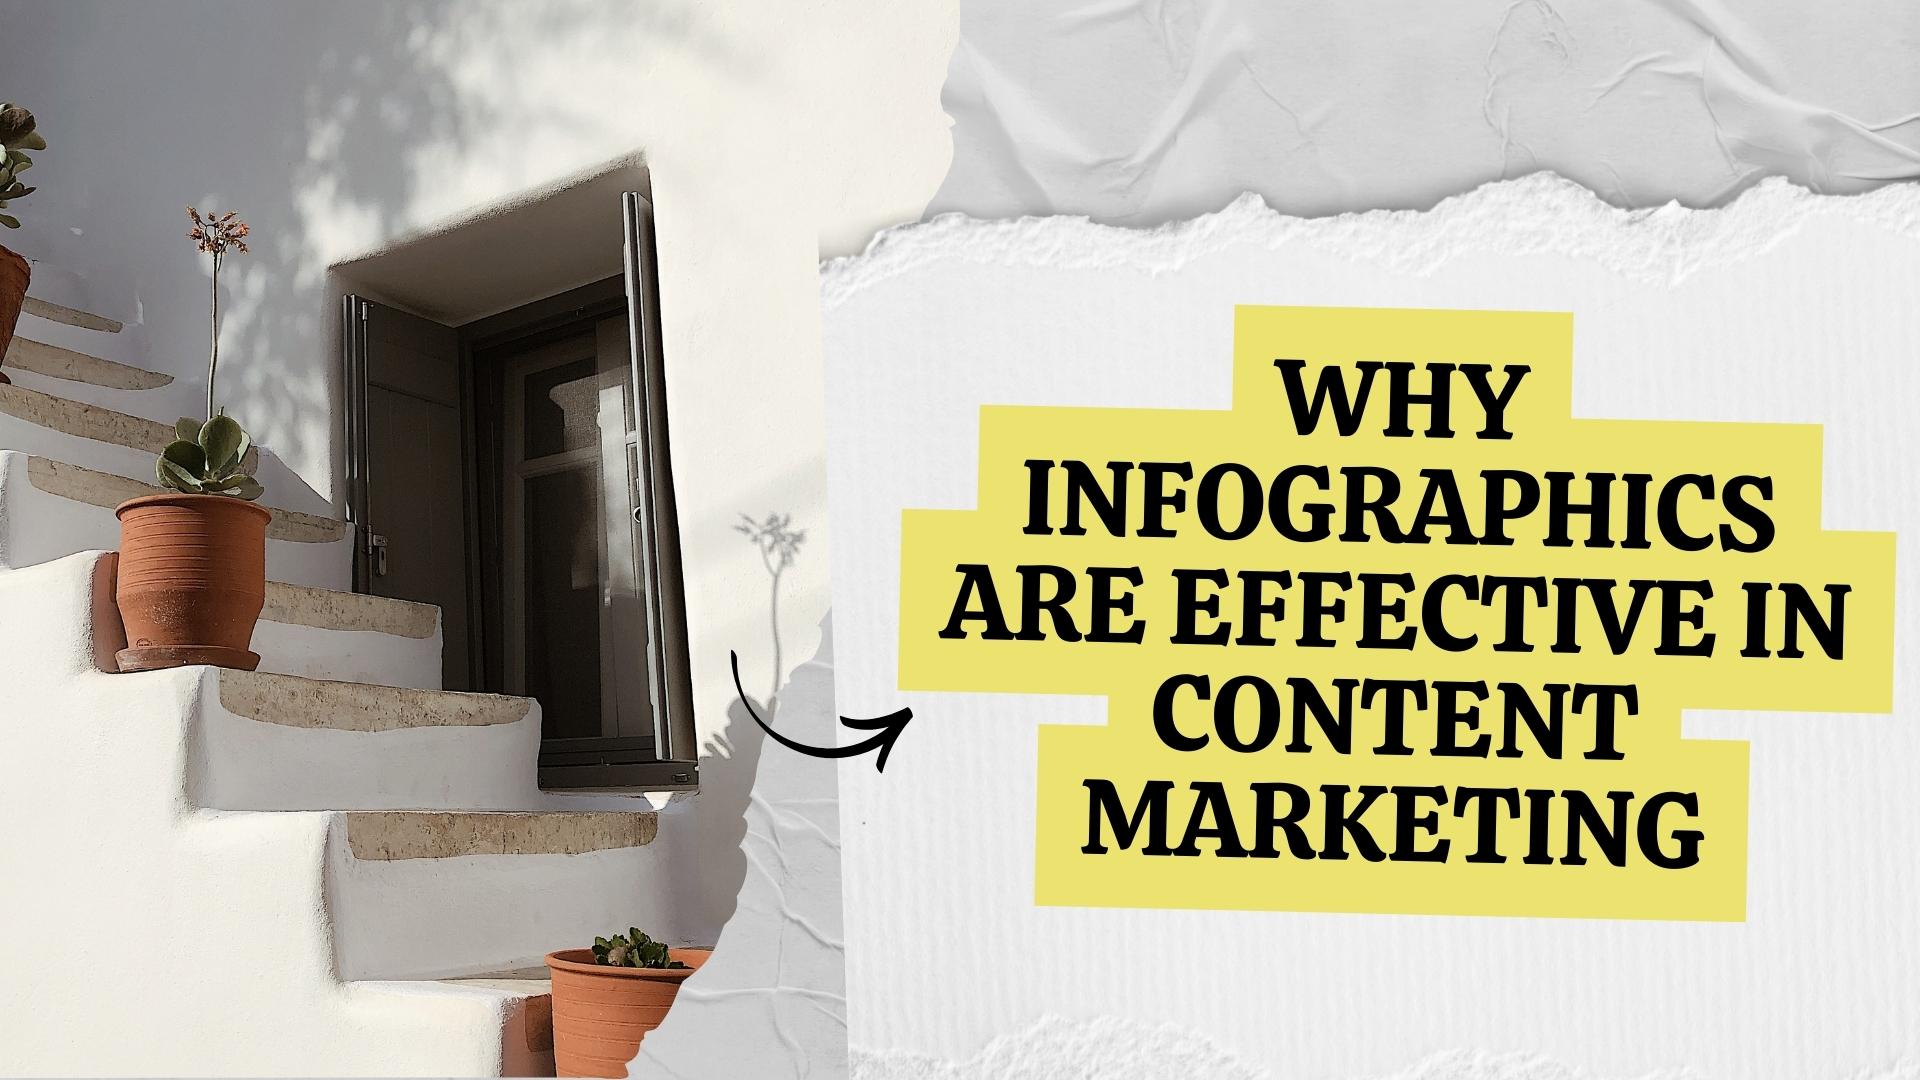 Why Infographics are Effective in Content Marketing